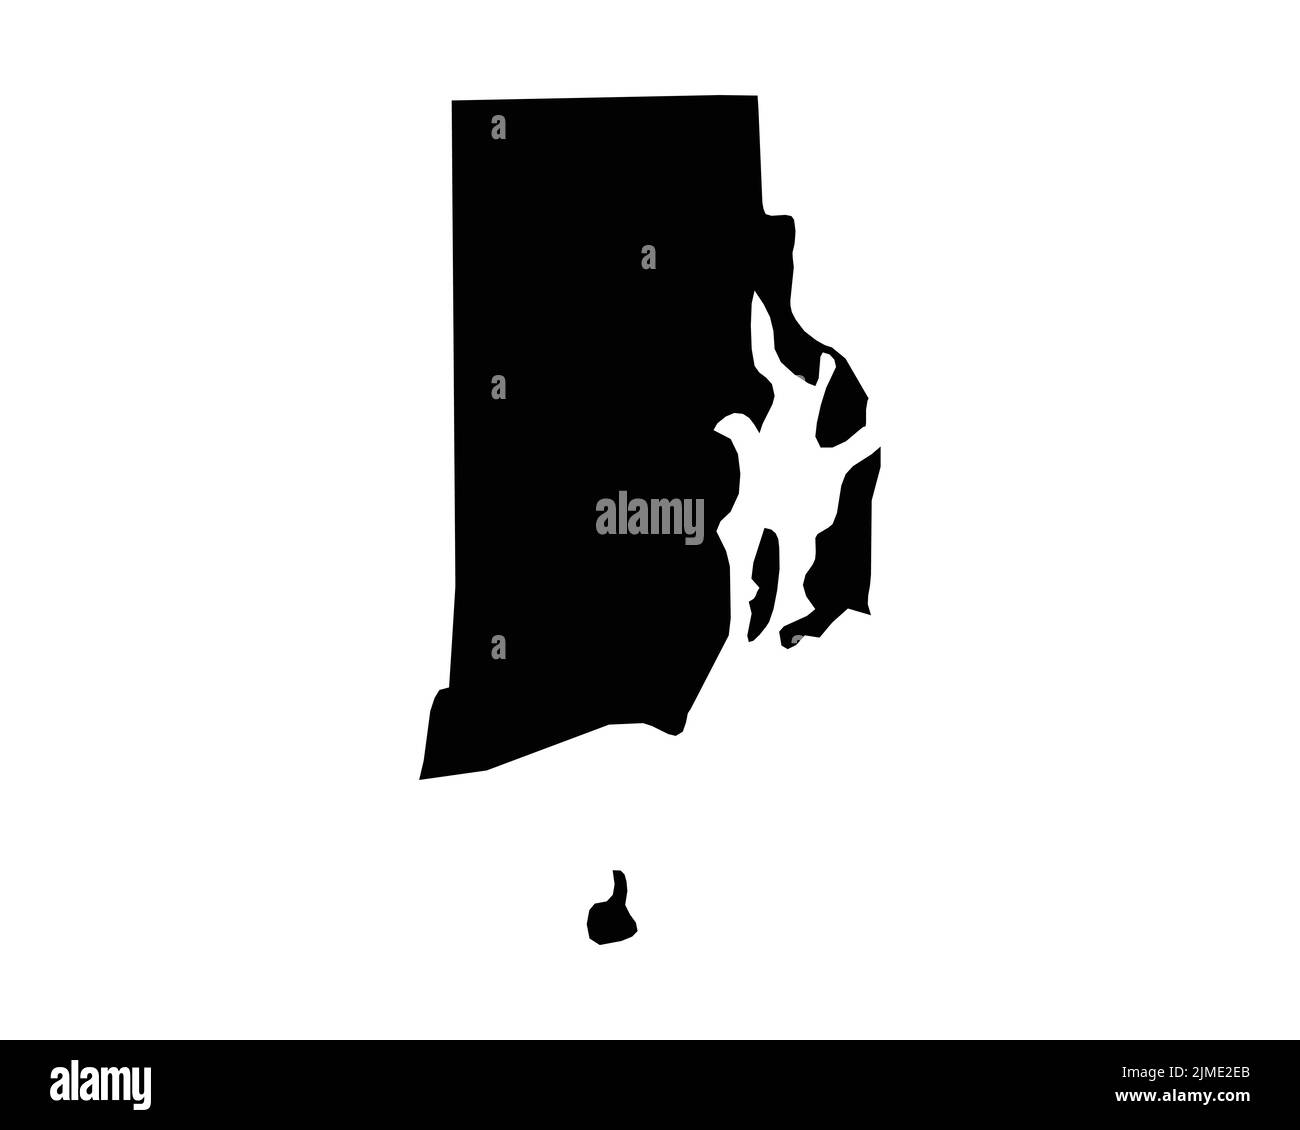 Rhode Island US Map. RI USA State Map. Black and White Rhode Islander State Border Boundary Line Outline Geography Territory Shape Vector Illustration Stock Vector